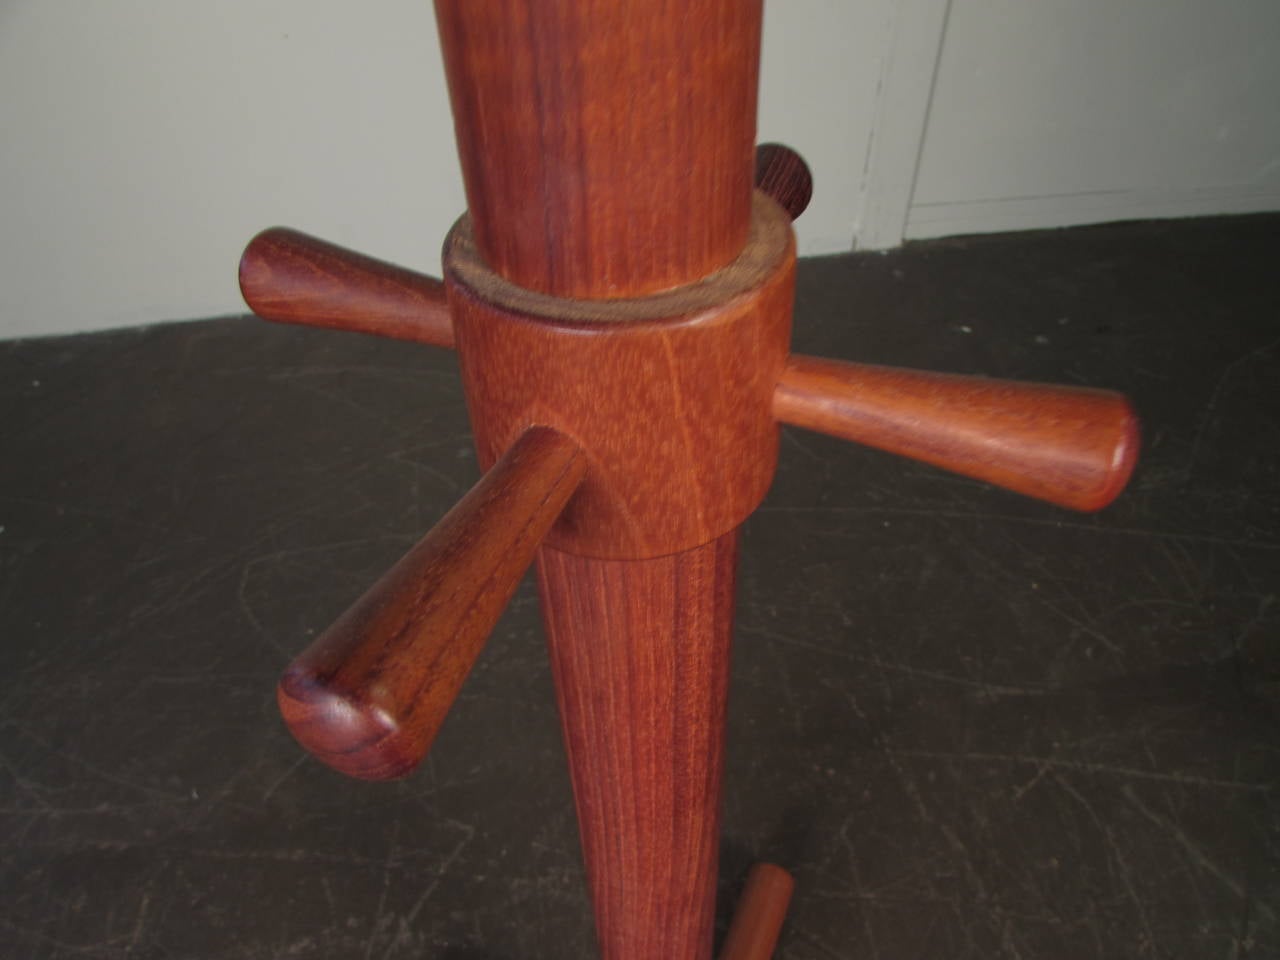 Unusual sculptural teak coat tree hat rack, Denmark, 1960s. Excellent condition.

We offer free regular deliveries to NYC and Philadelphia area. Delivery to DC, MD, CT and MA are available if schedule permits, please message for a location-based